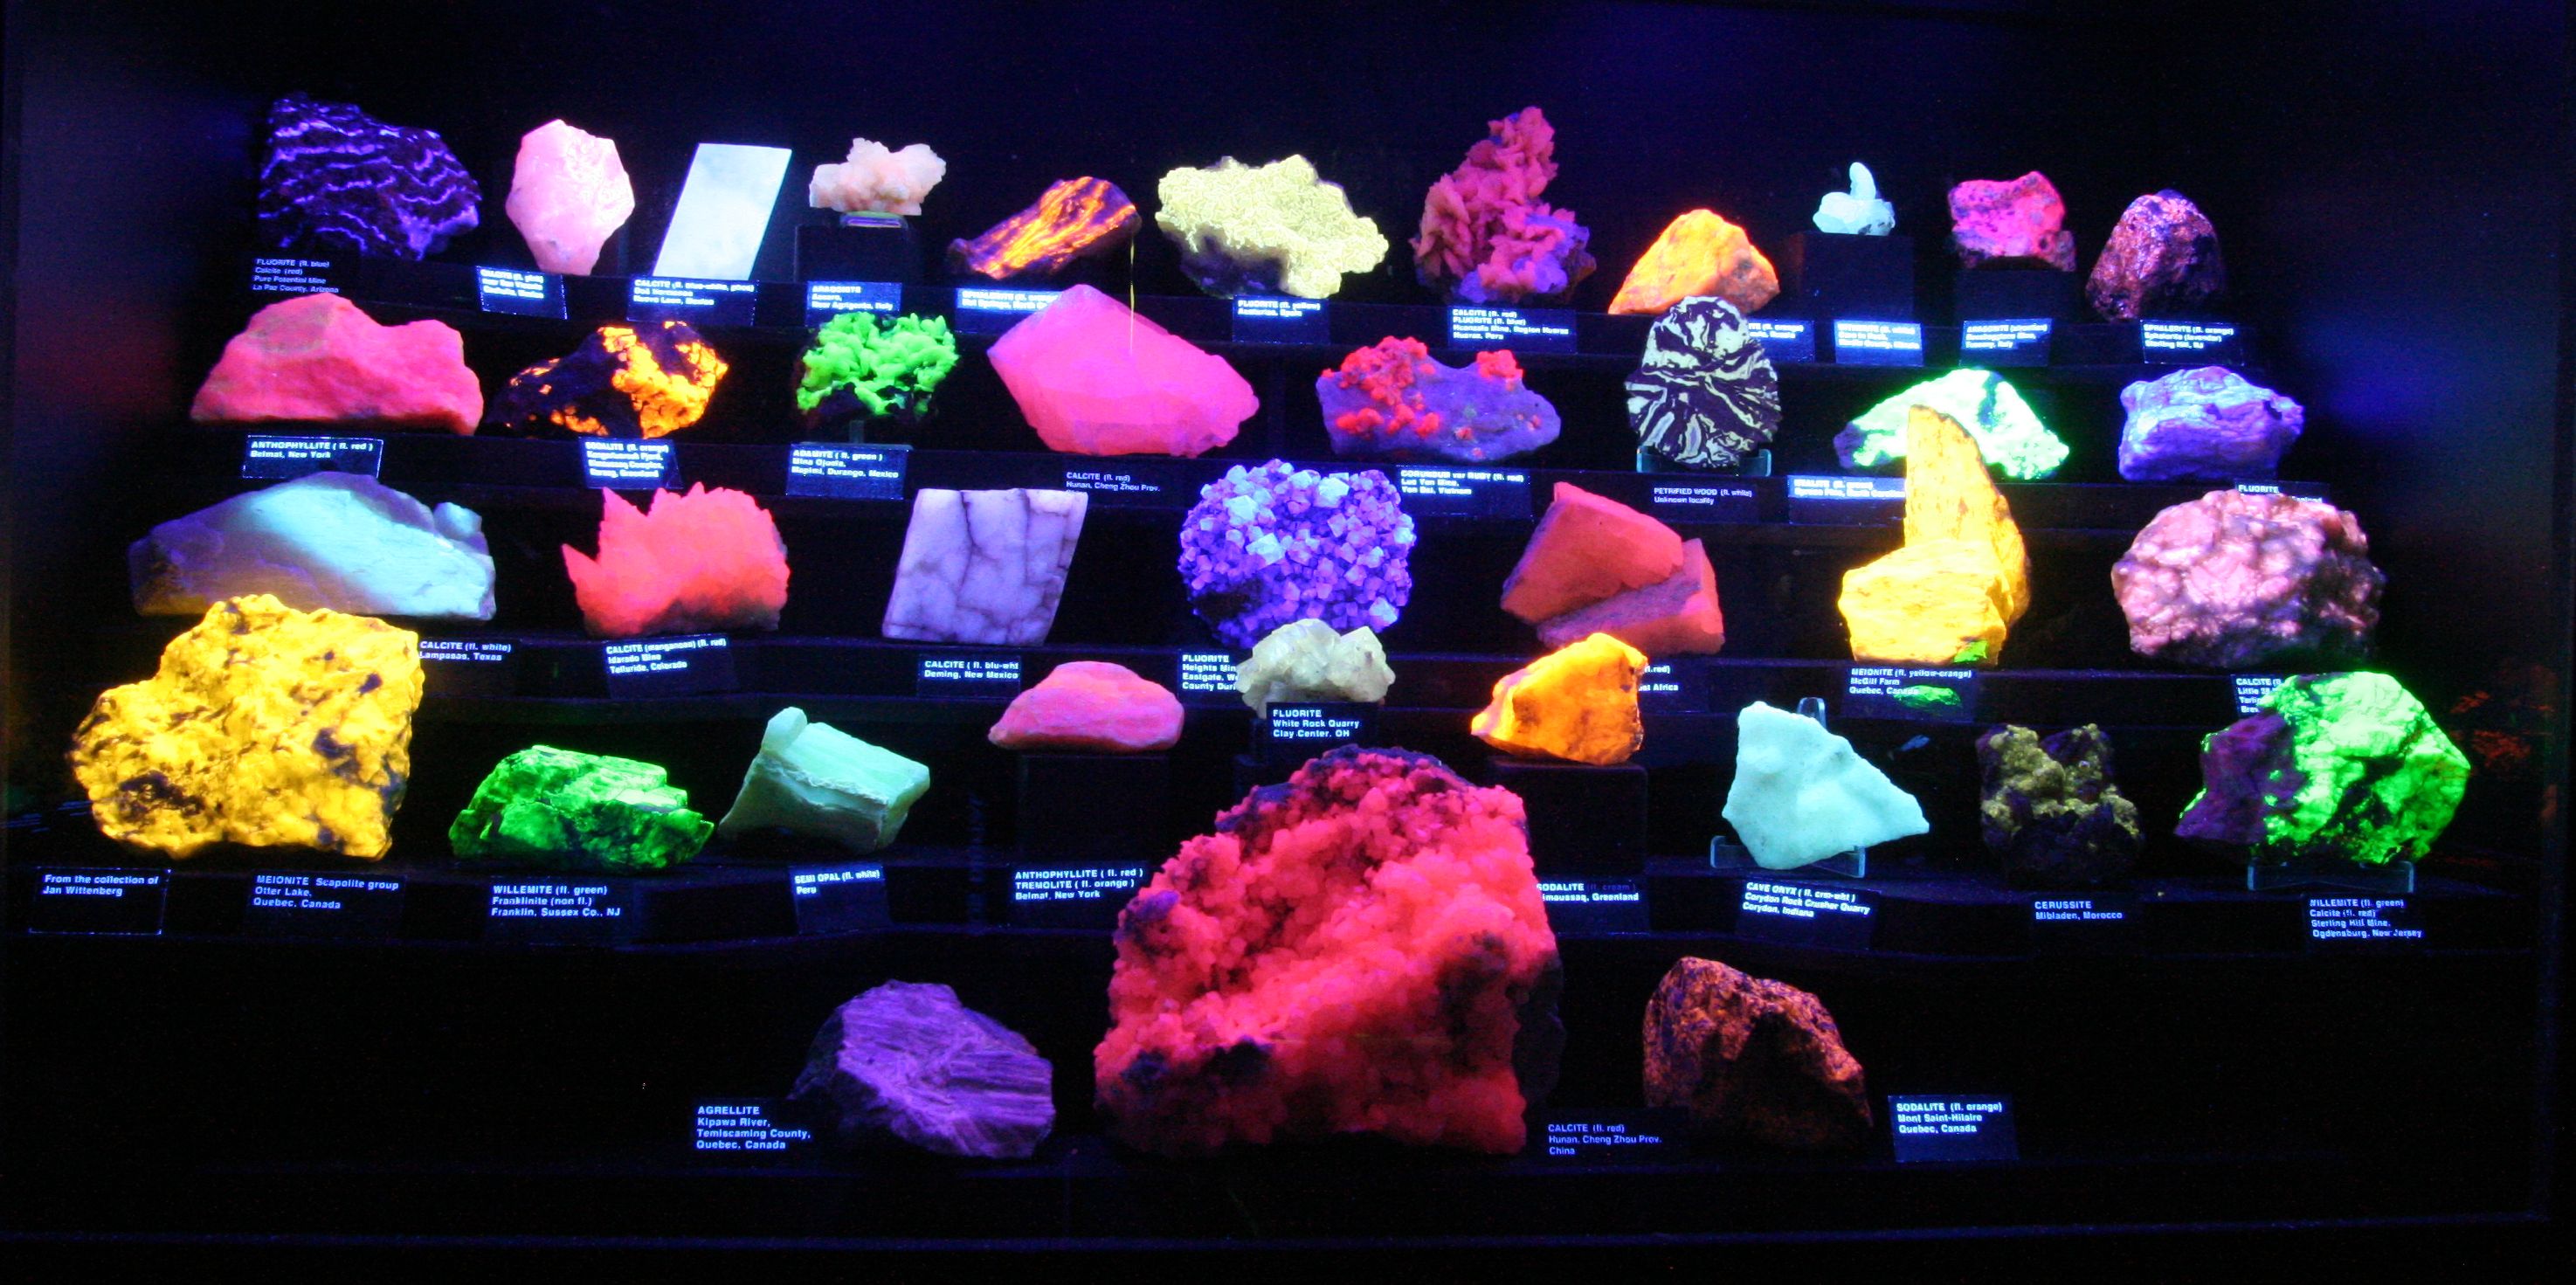 Fluorescent gems and minerals at the Huntsville Gem, Jewelry, and Mineral Show